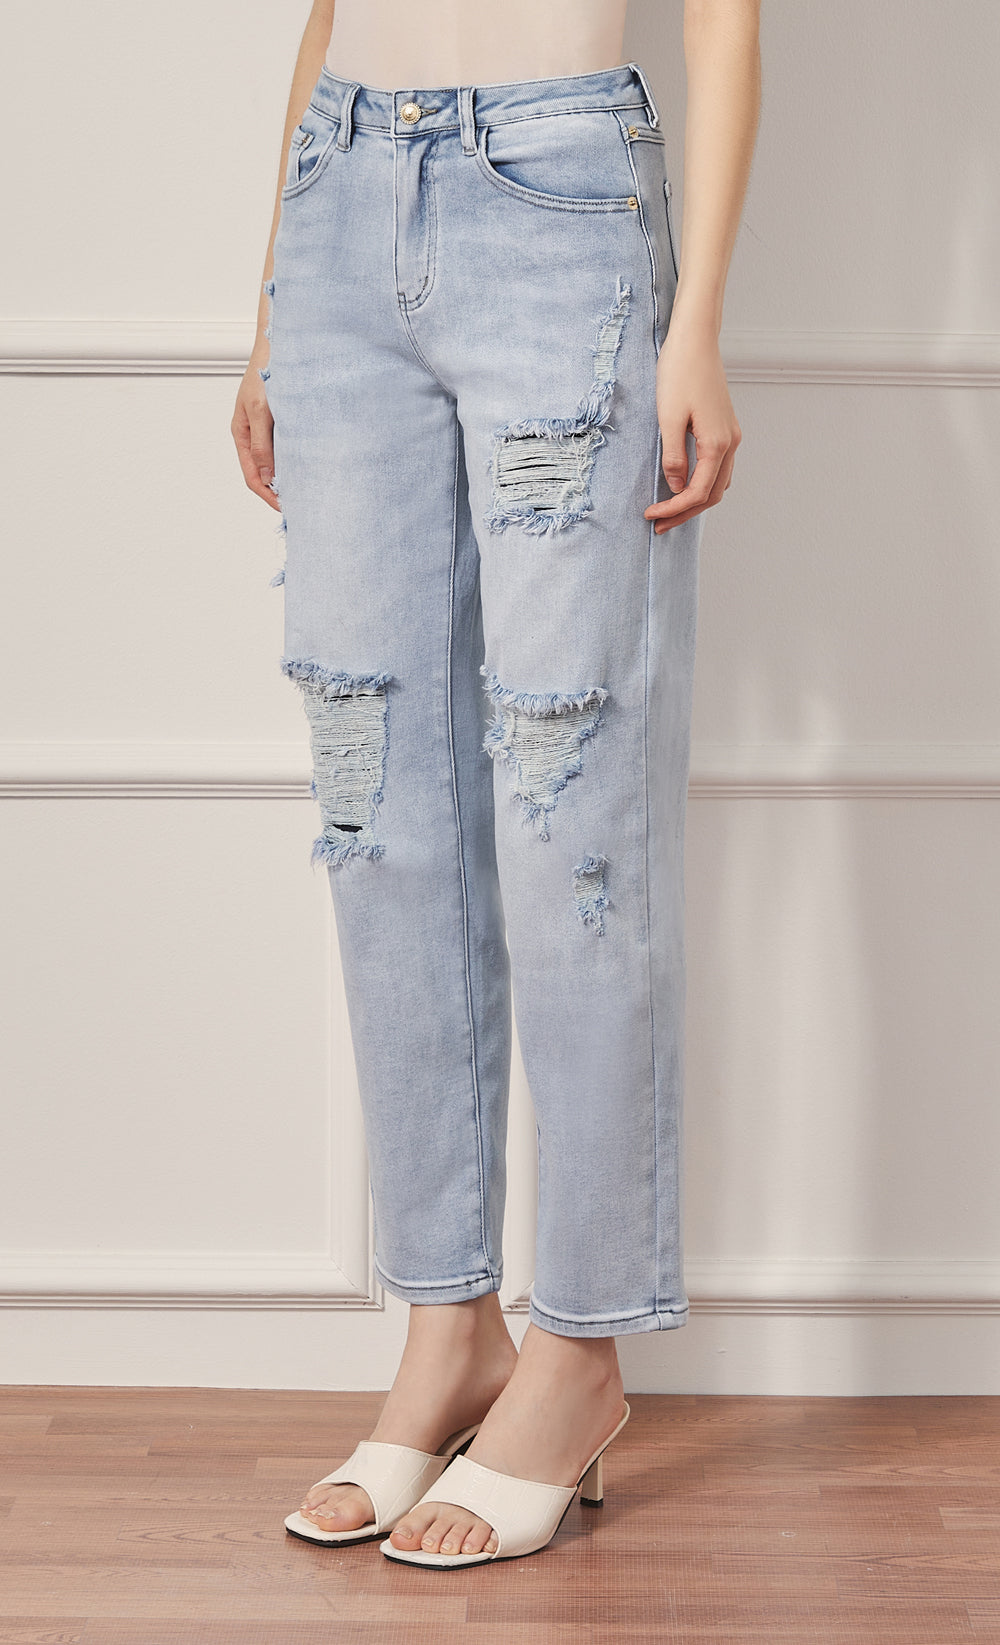 Tom Boy Jeans in Light Blue – The dUCk Group